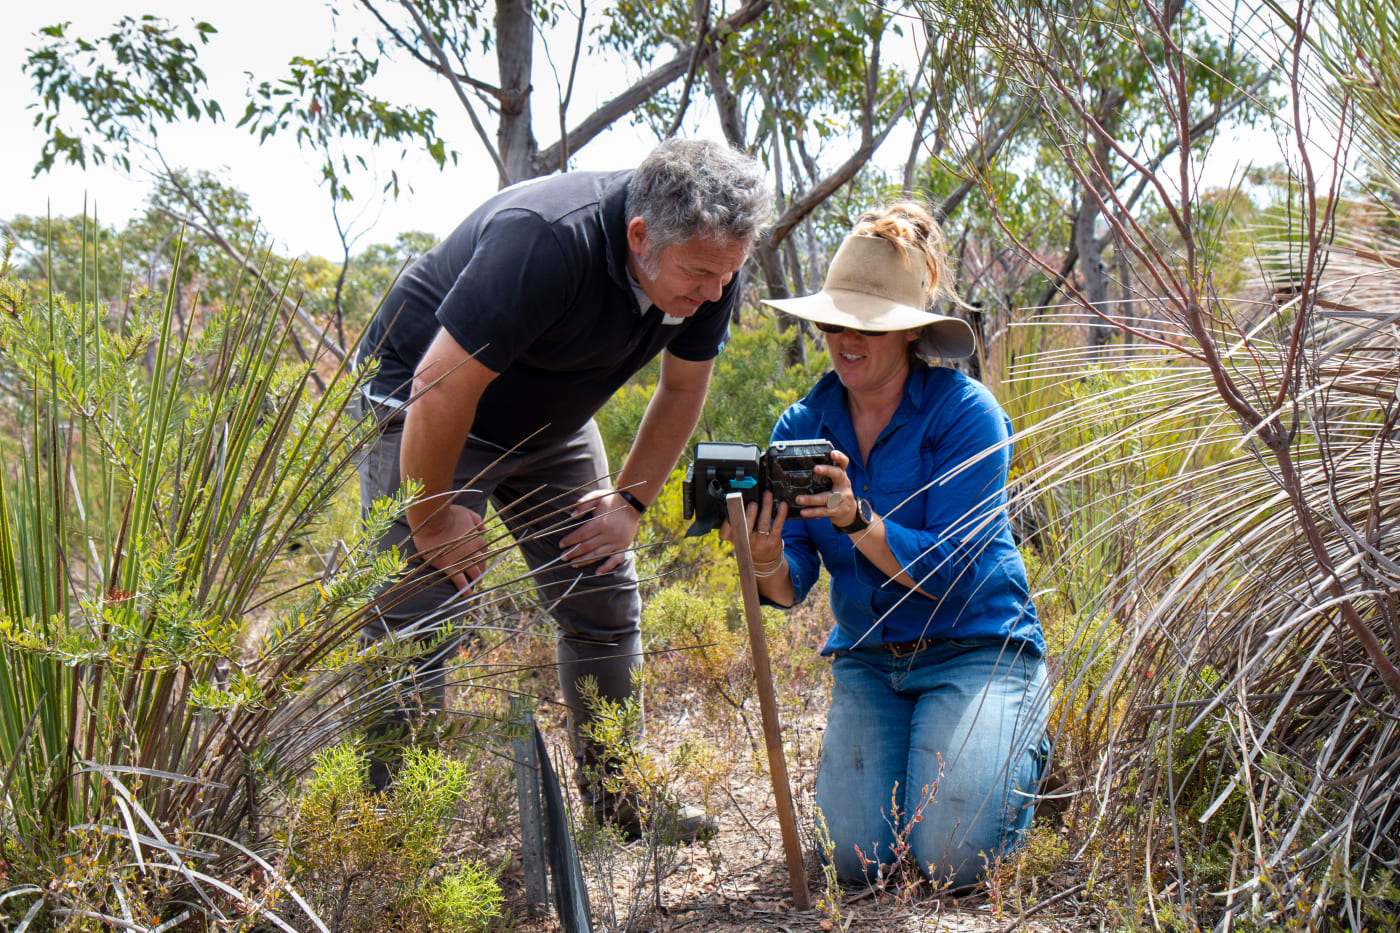 Darren Grover from WWF-Australia and Heidi Groffen from Kangaroo Island Land for Wildlife check a sensor camera on a fire-affected property called the Western River Refuge